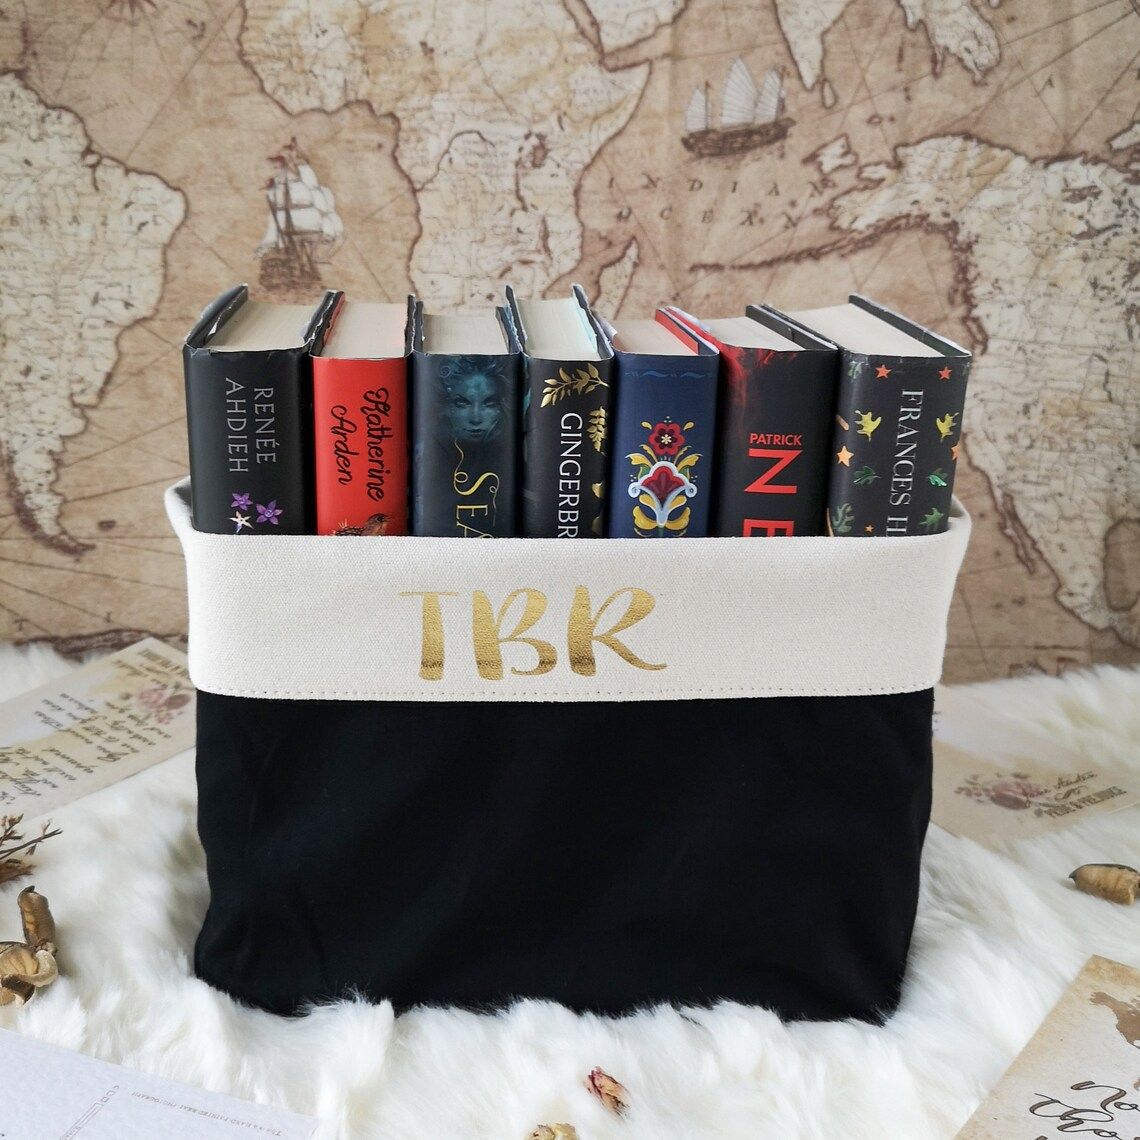 Canvas basket with TBR printed on side containing books